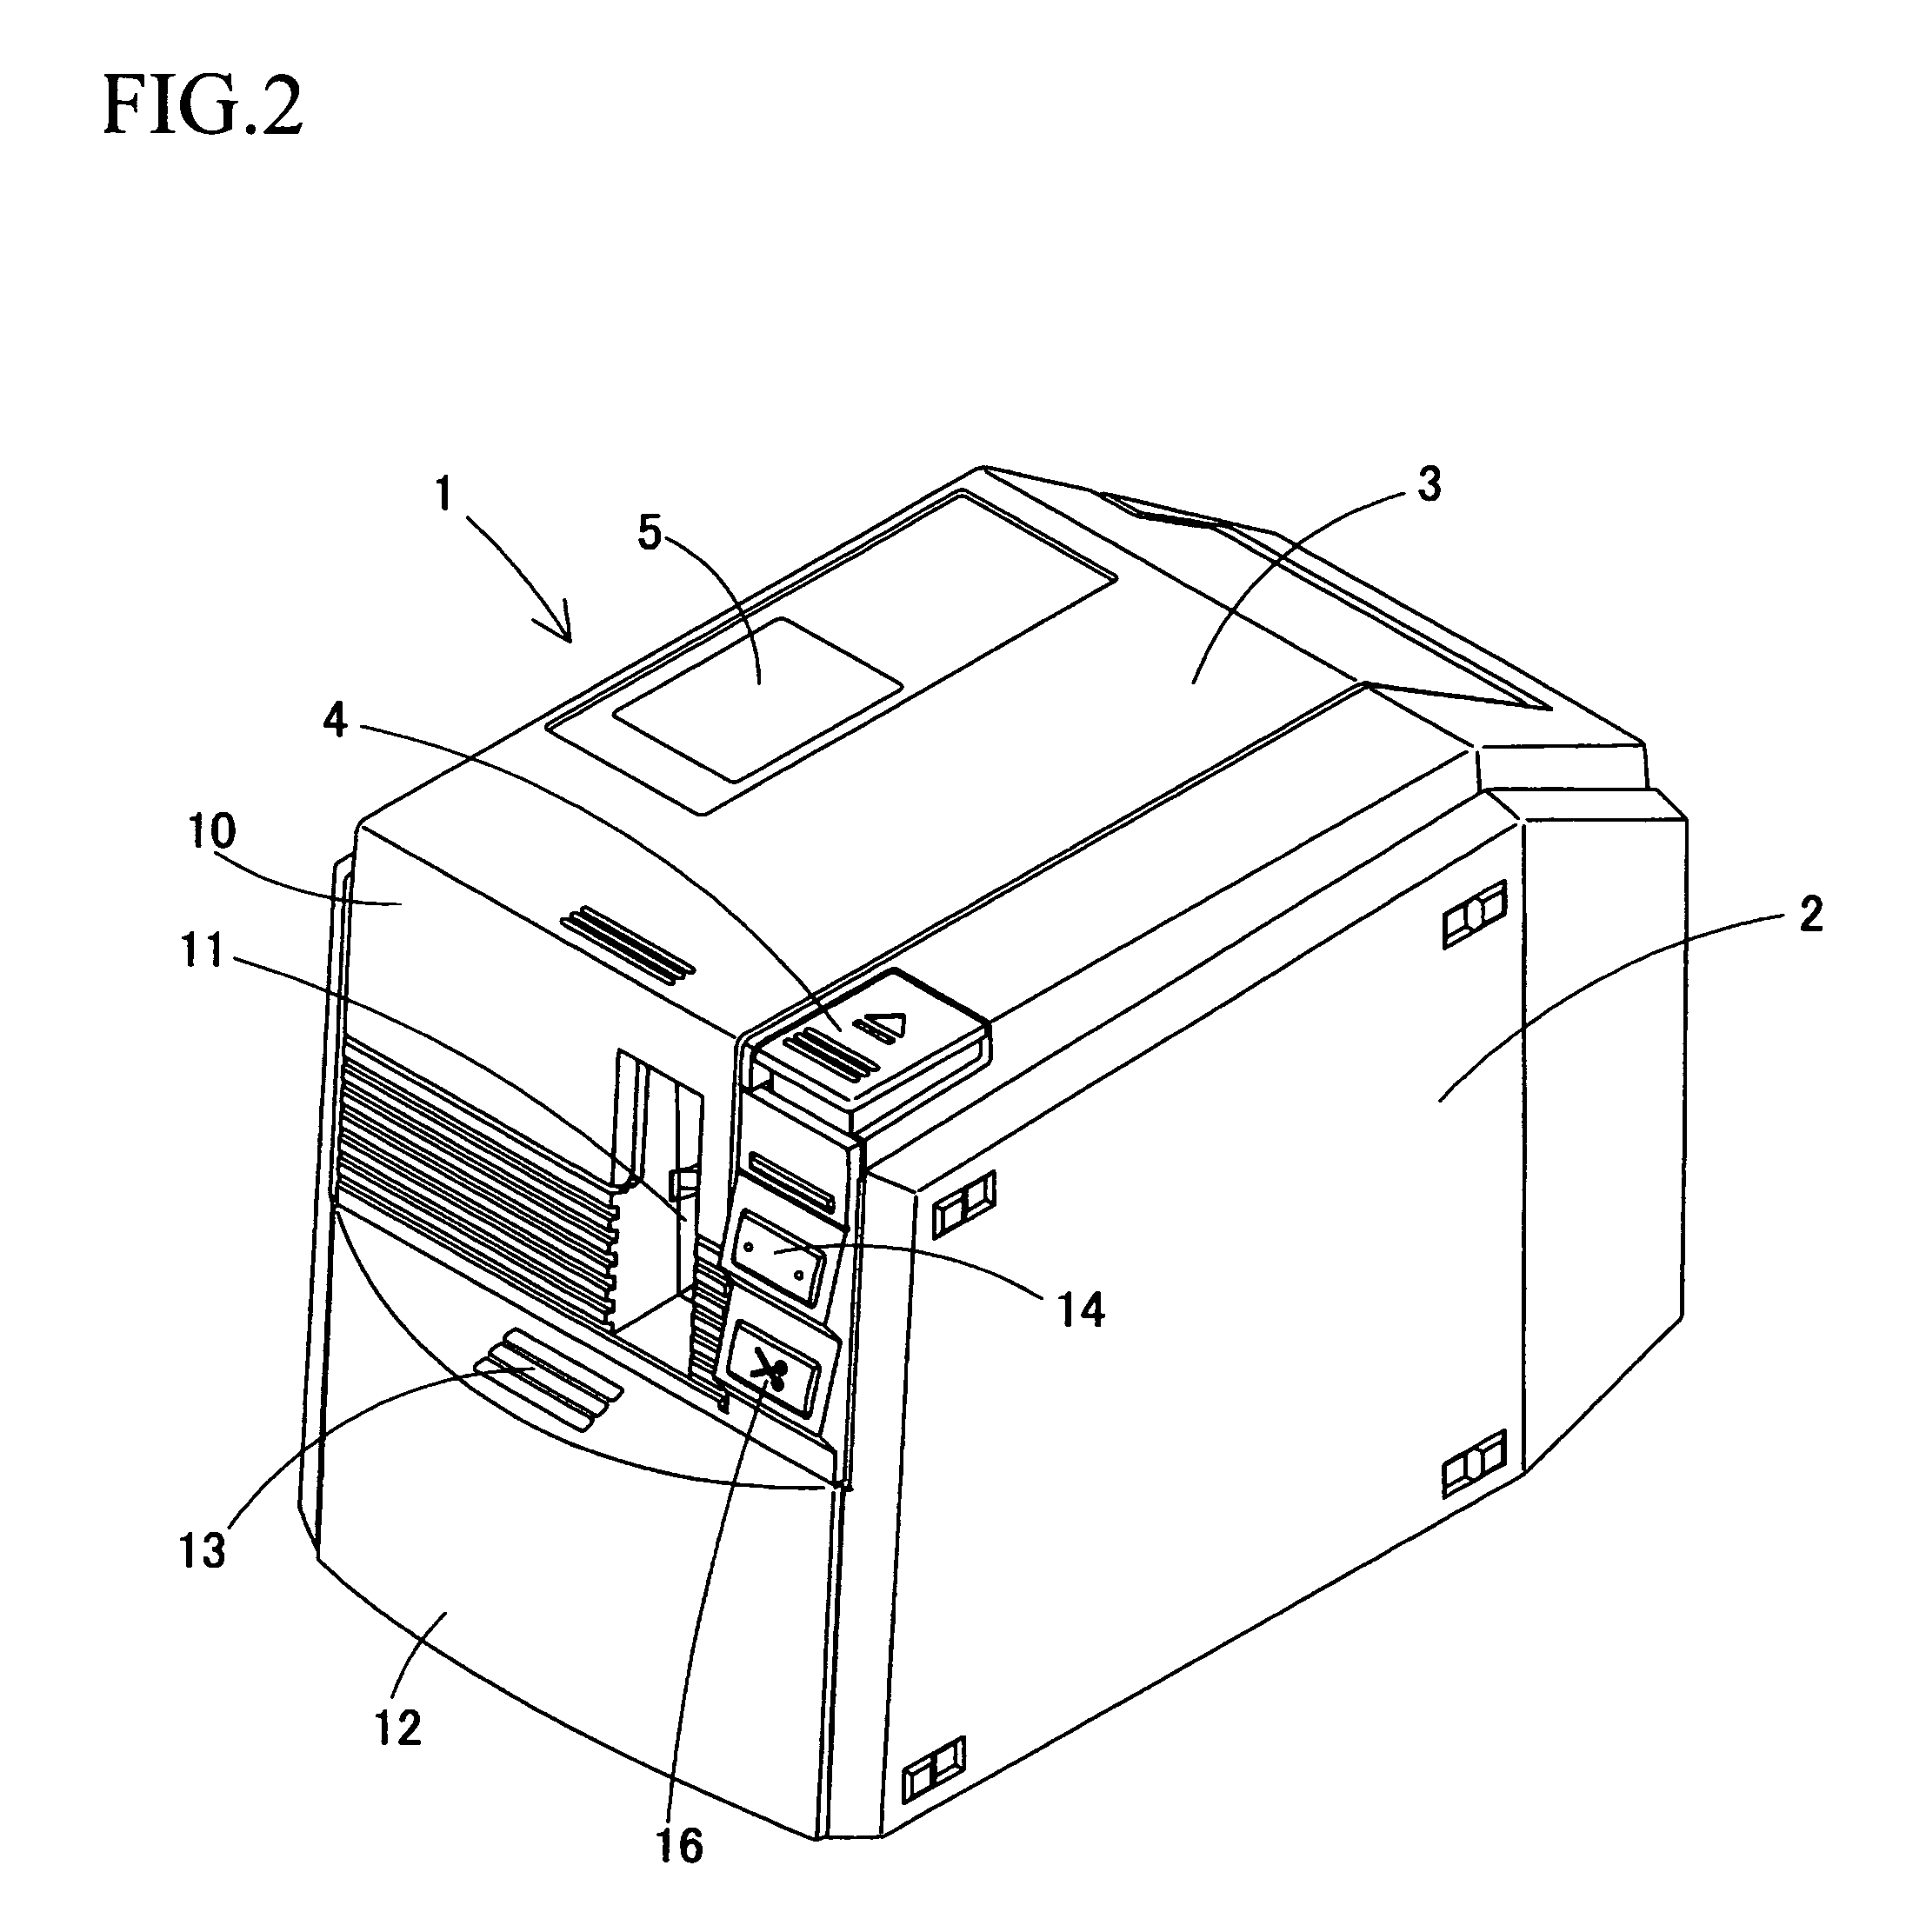 Tag-label producing device